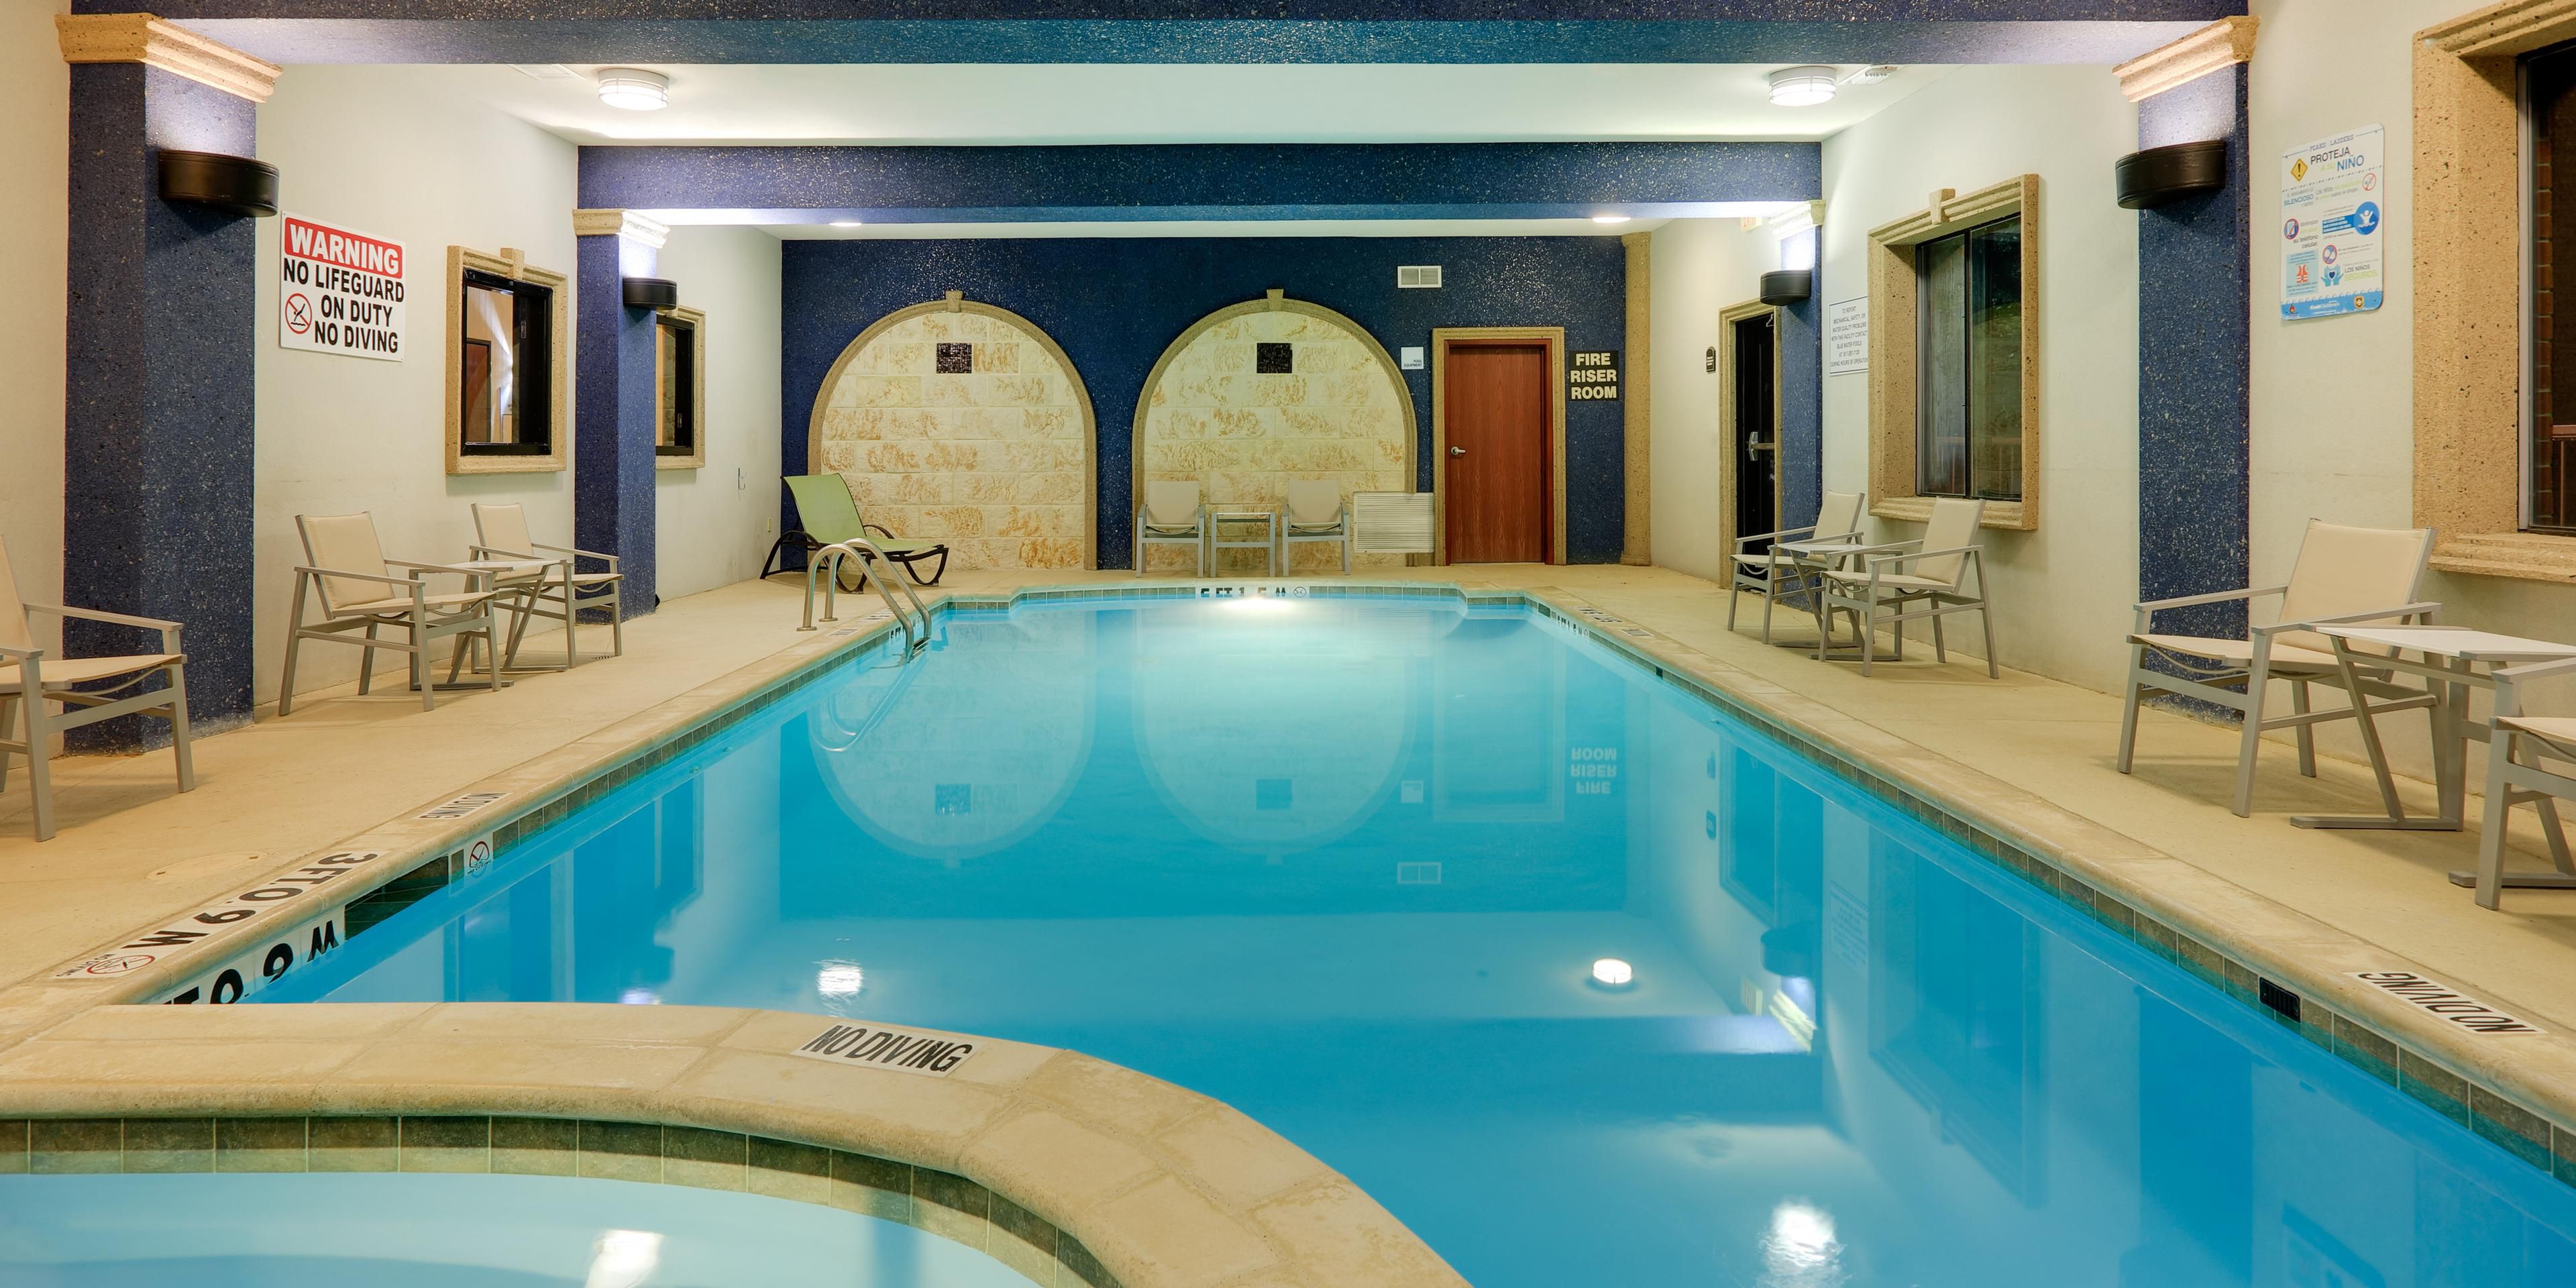 Enjoy our Indoor Pool and Hot Tub year round. Perfect place to unwind after a long day of travels or maybe to just get away for a while. 